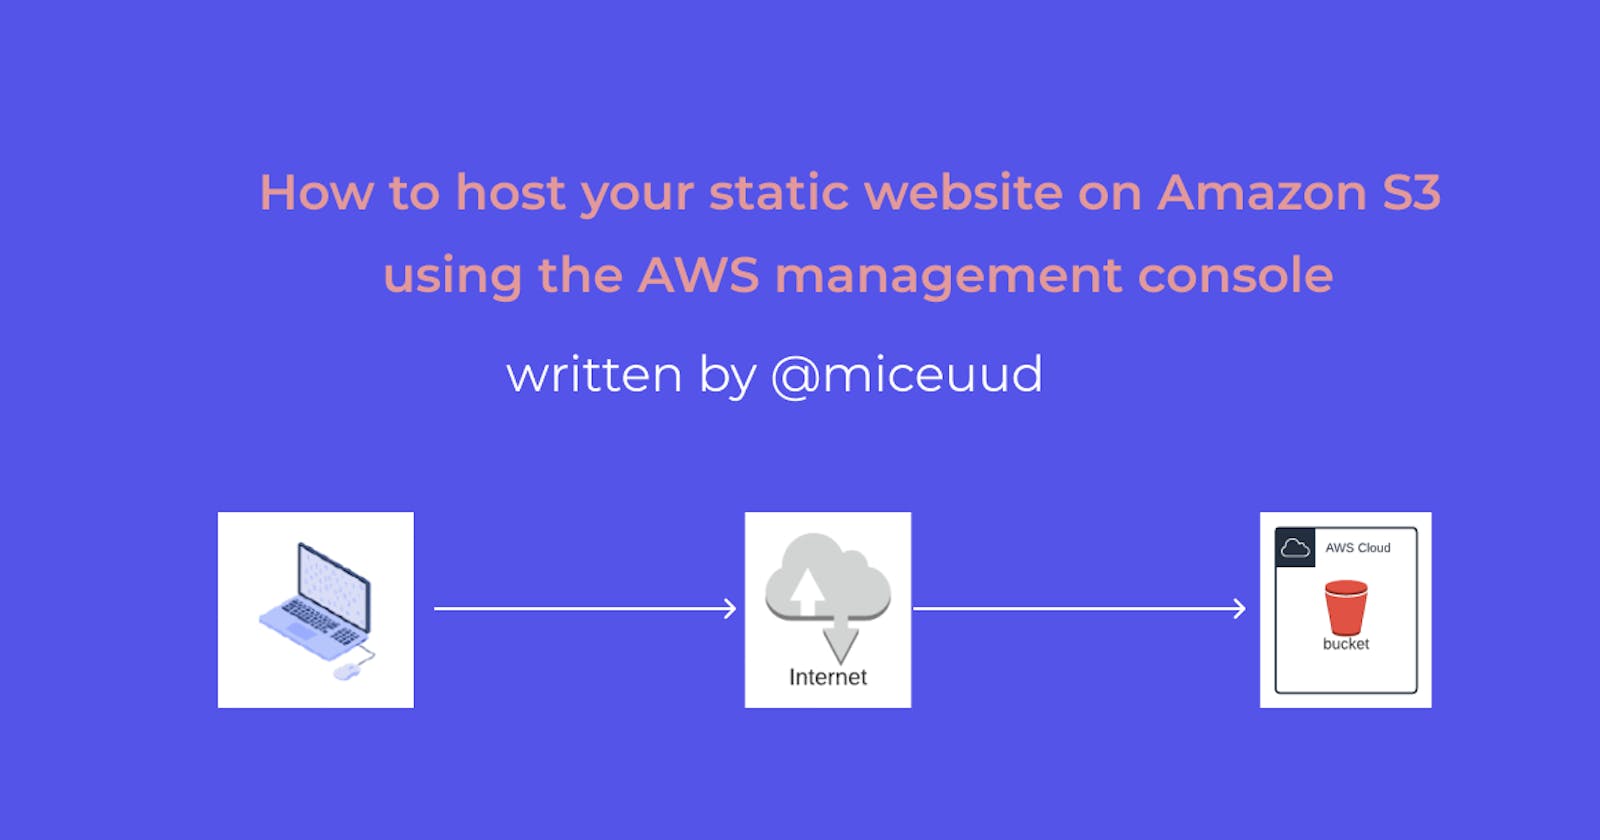 How to host your website on Amazon S3 using the AWS management console